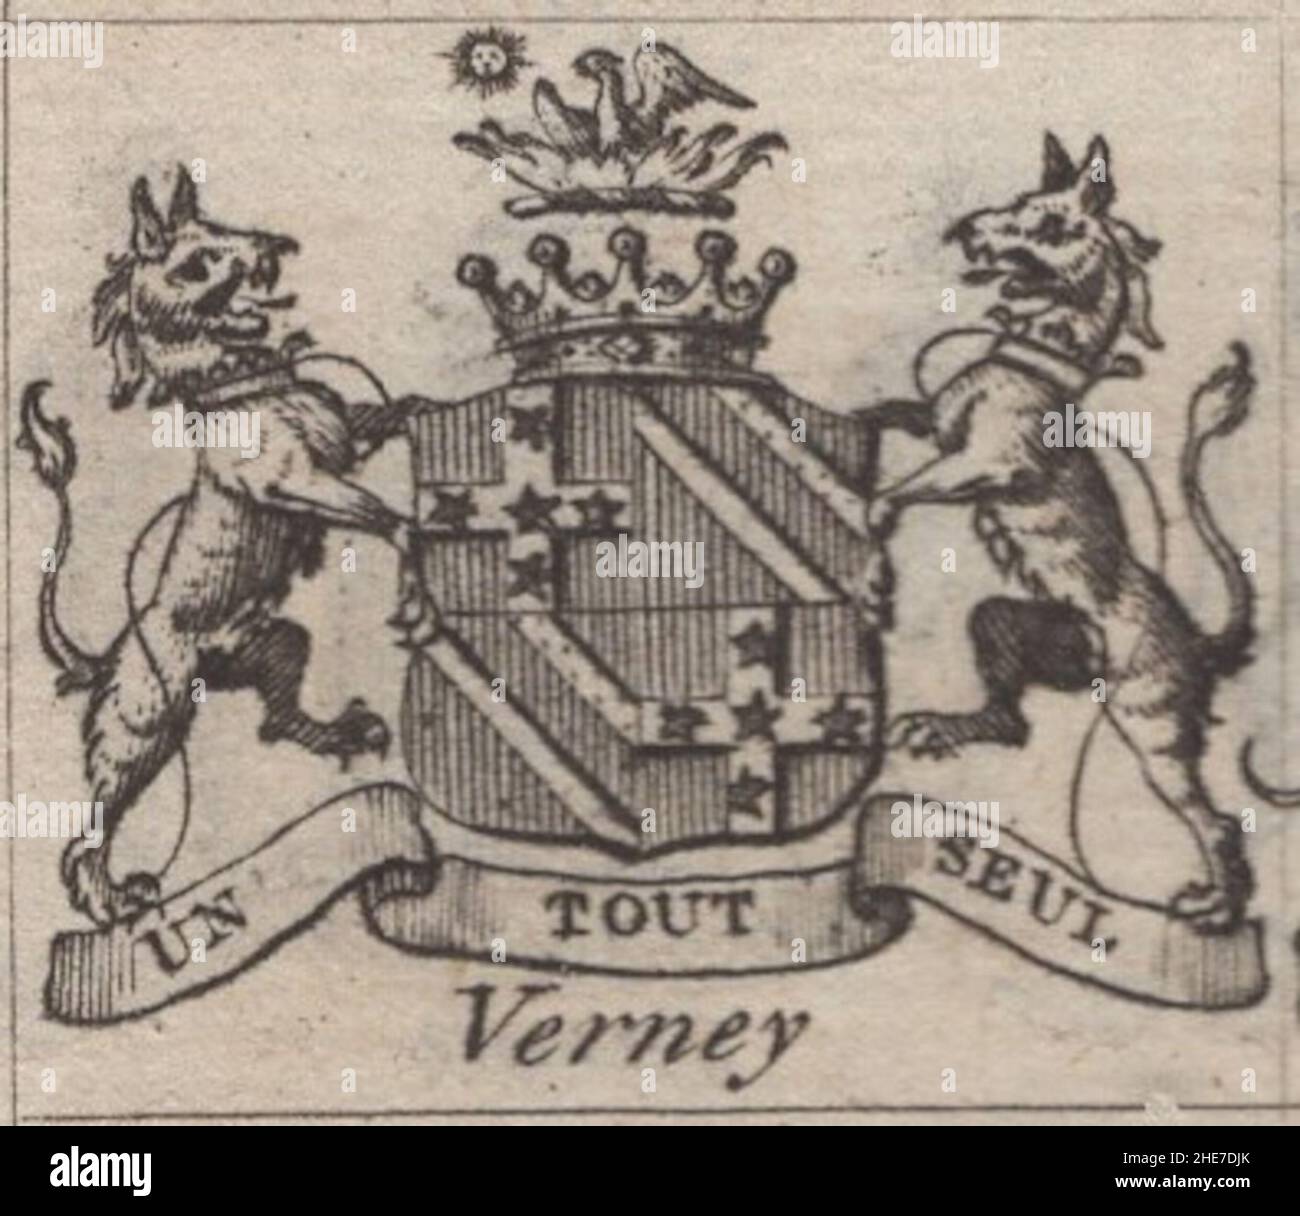 Historical antique 18th century engraving heraldy coat of arms, crest,  Irish Earl Verney , Motto / slogan: Un Tout Seul by Woodman & Mutlow fc russel co circa 1780s Source: original engravings from  the annual almanach book. Stock Photo